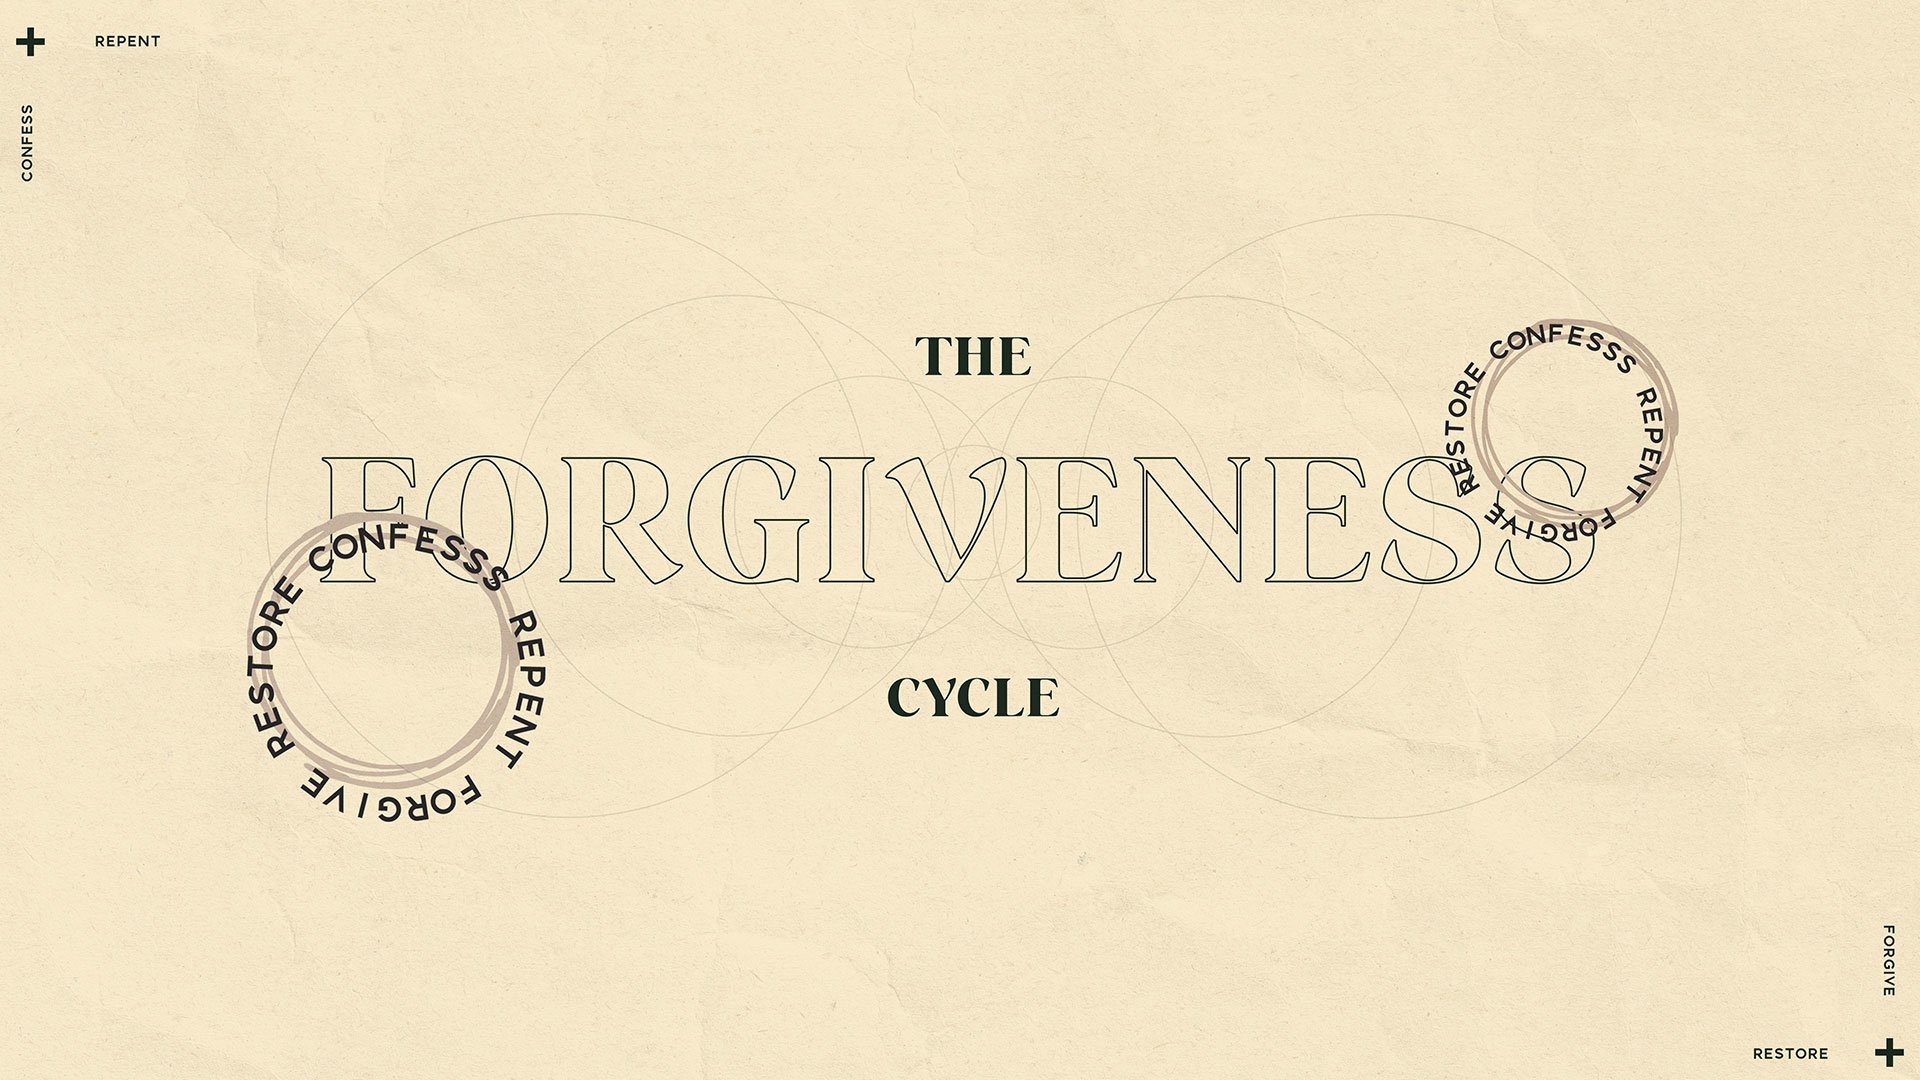 "The Forgiveness Cycle" Message